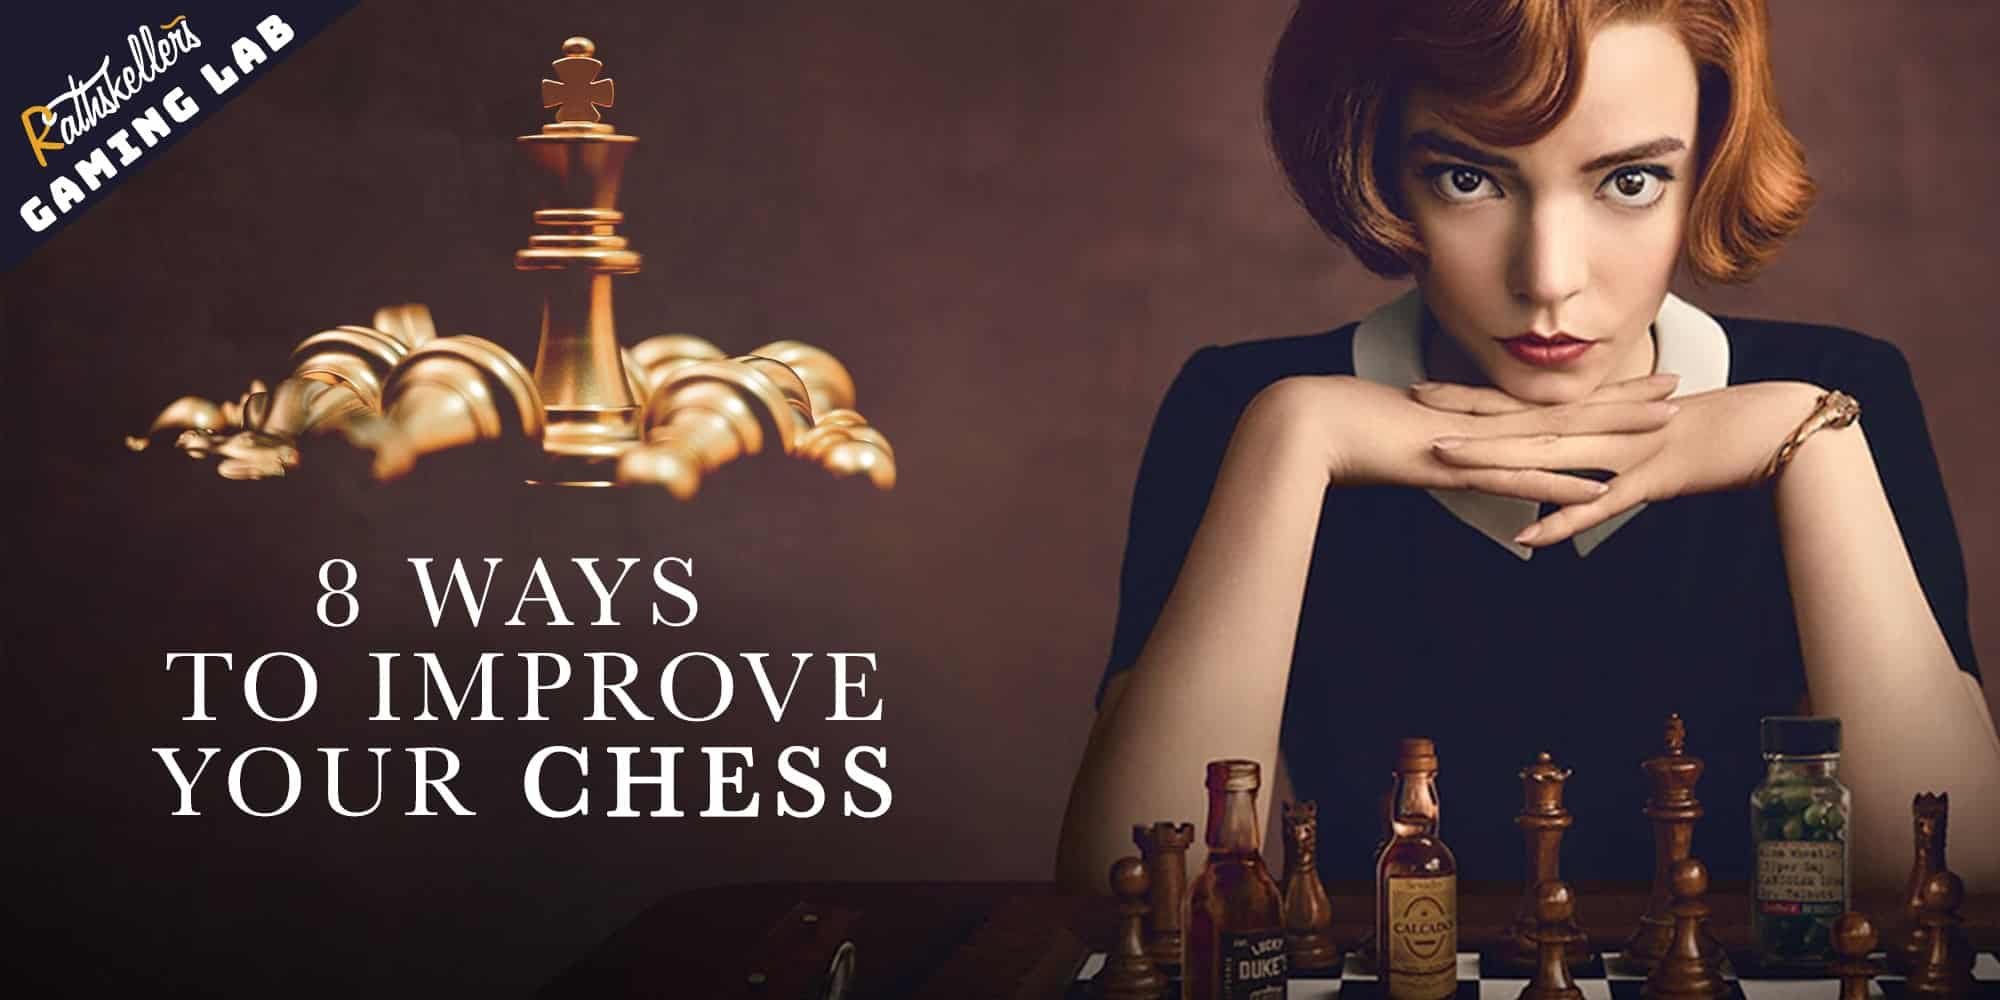 8 ways to improve your Chess after watching Queens Gambit